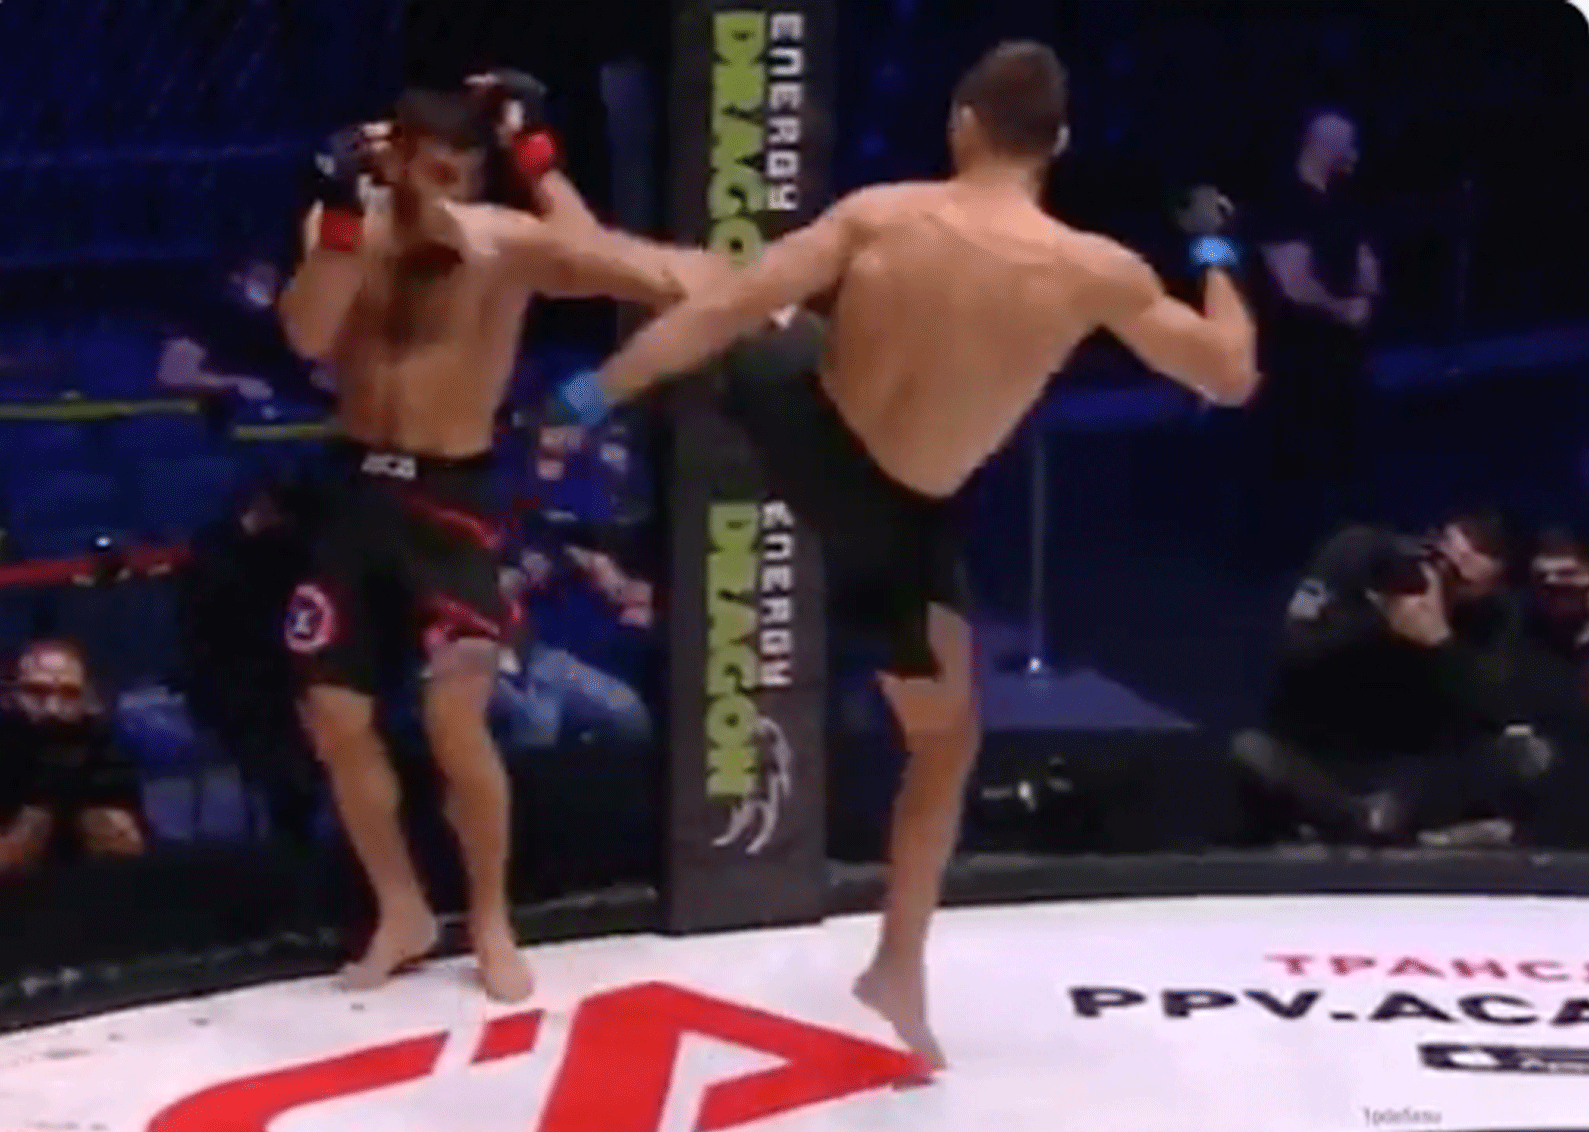 Spectaculaire jump-kick leidt tot stevige knock-out op MMA event (video)